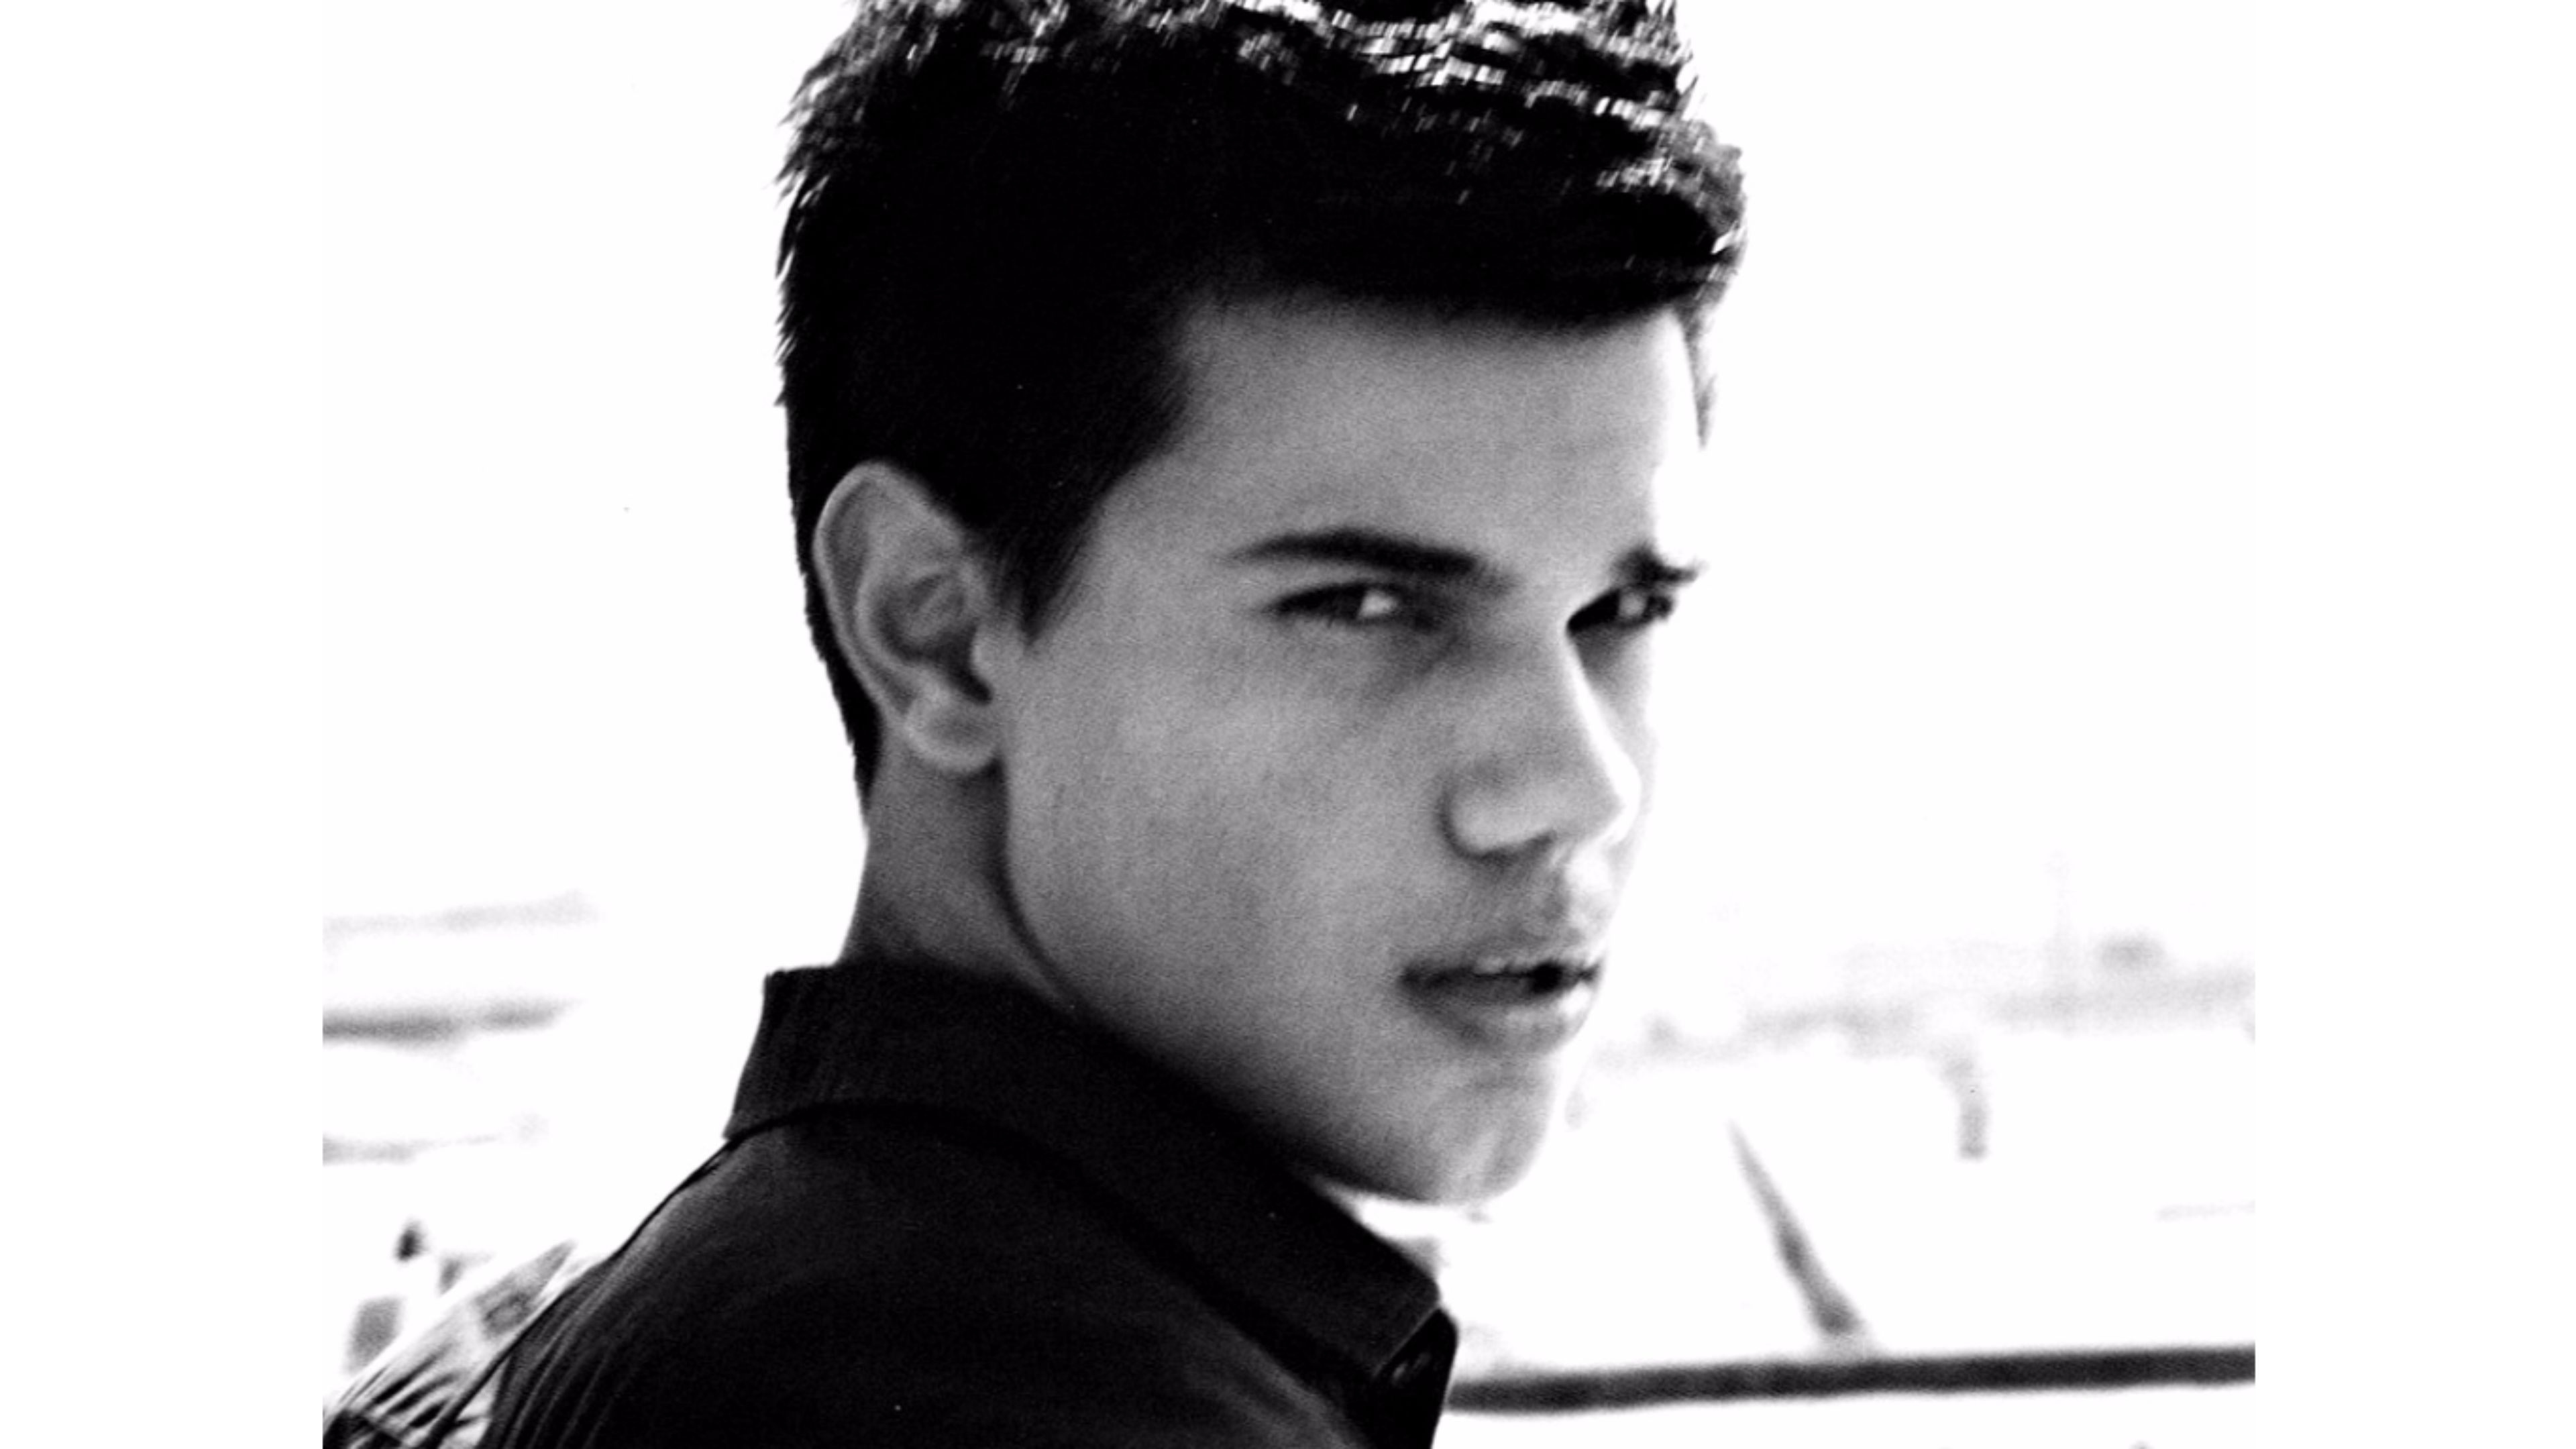 Taylor Lautner Background The